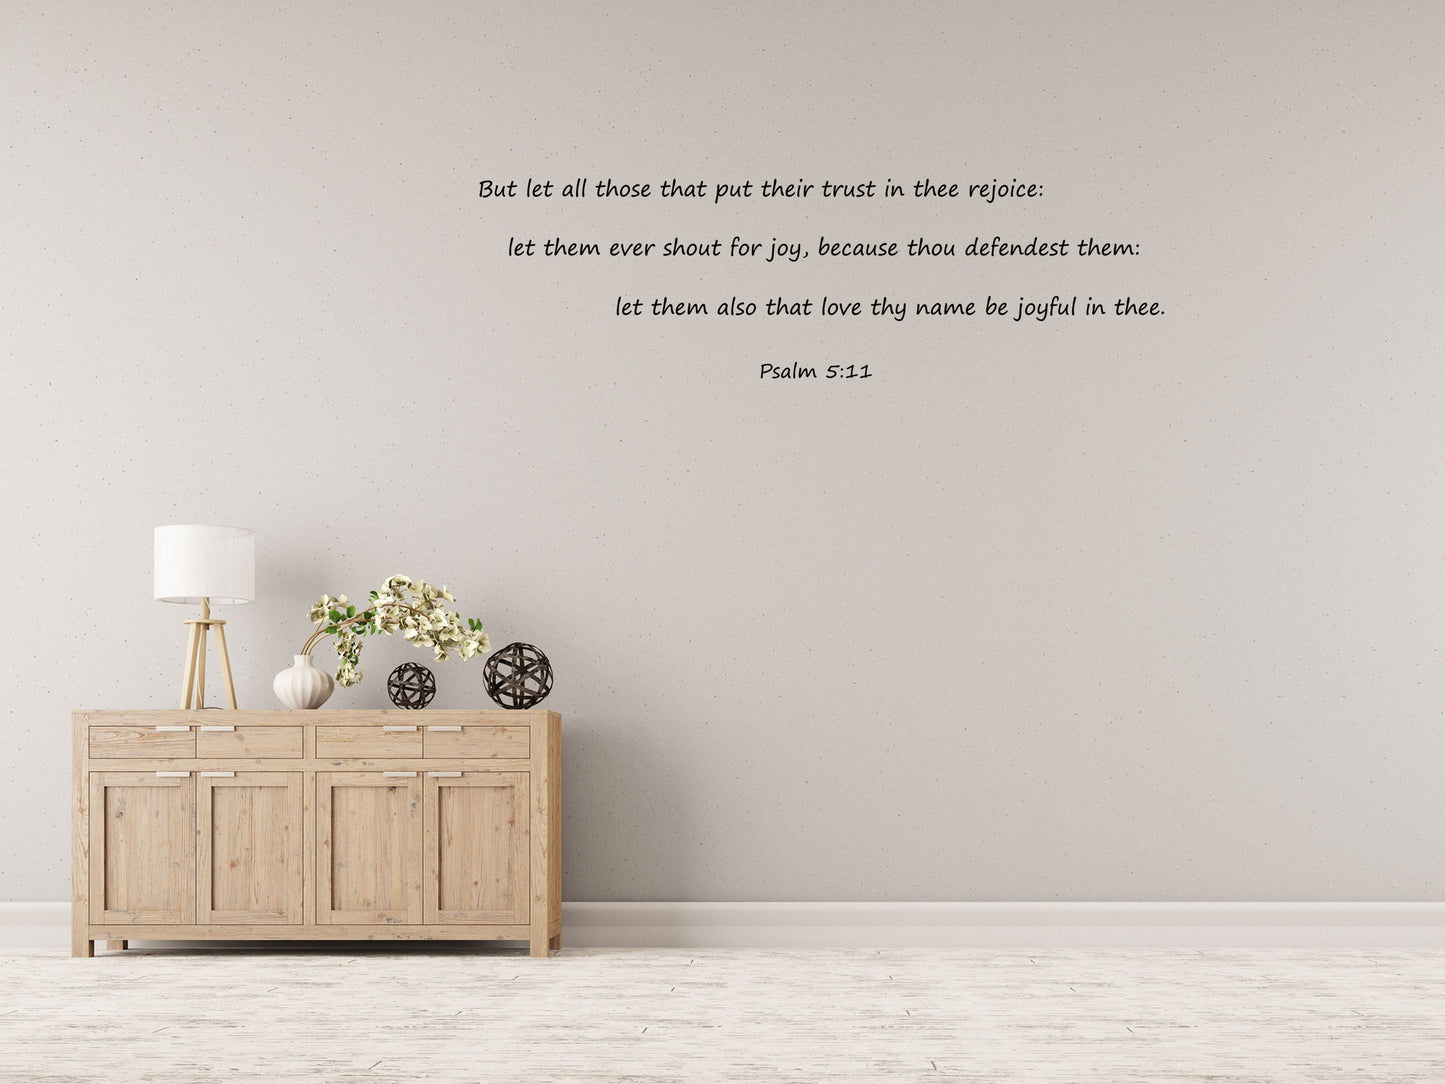 Psalm 5:11 - Scripture Wall Decals Vinyl Wall Decal Inspirational Wall Signs 